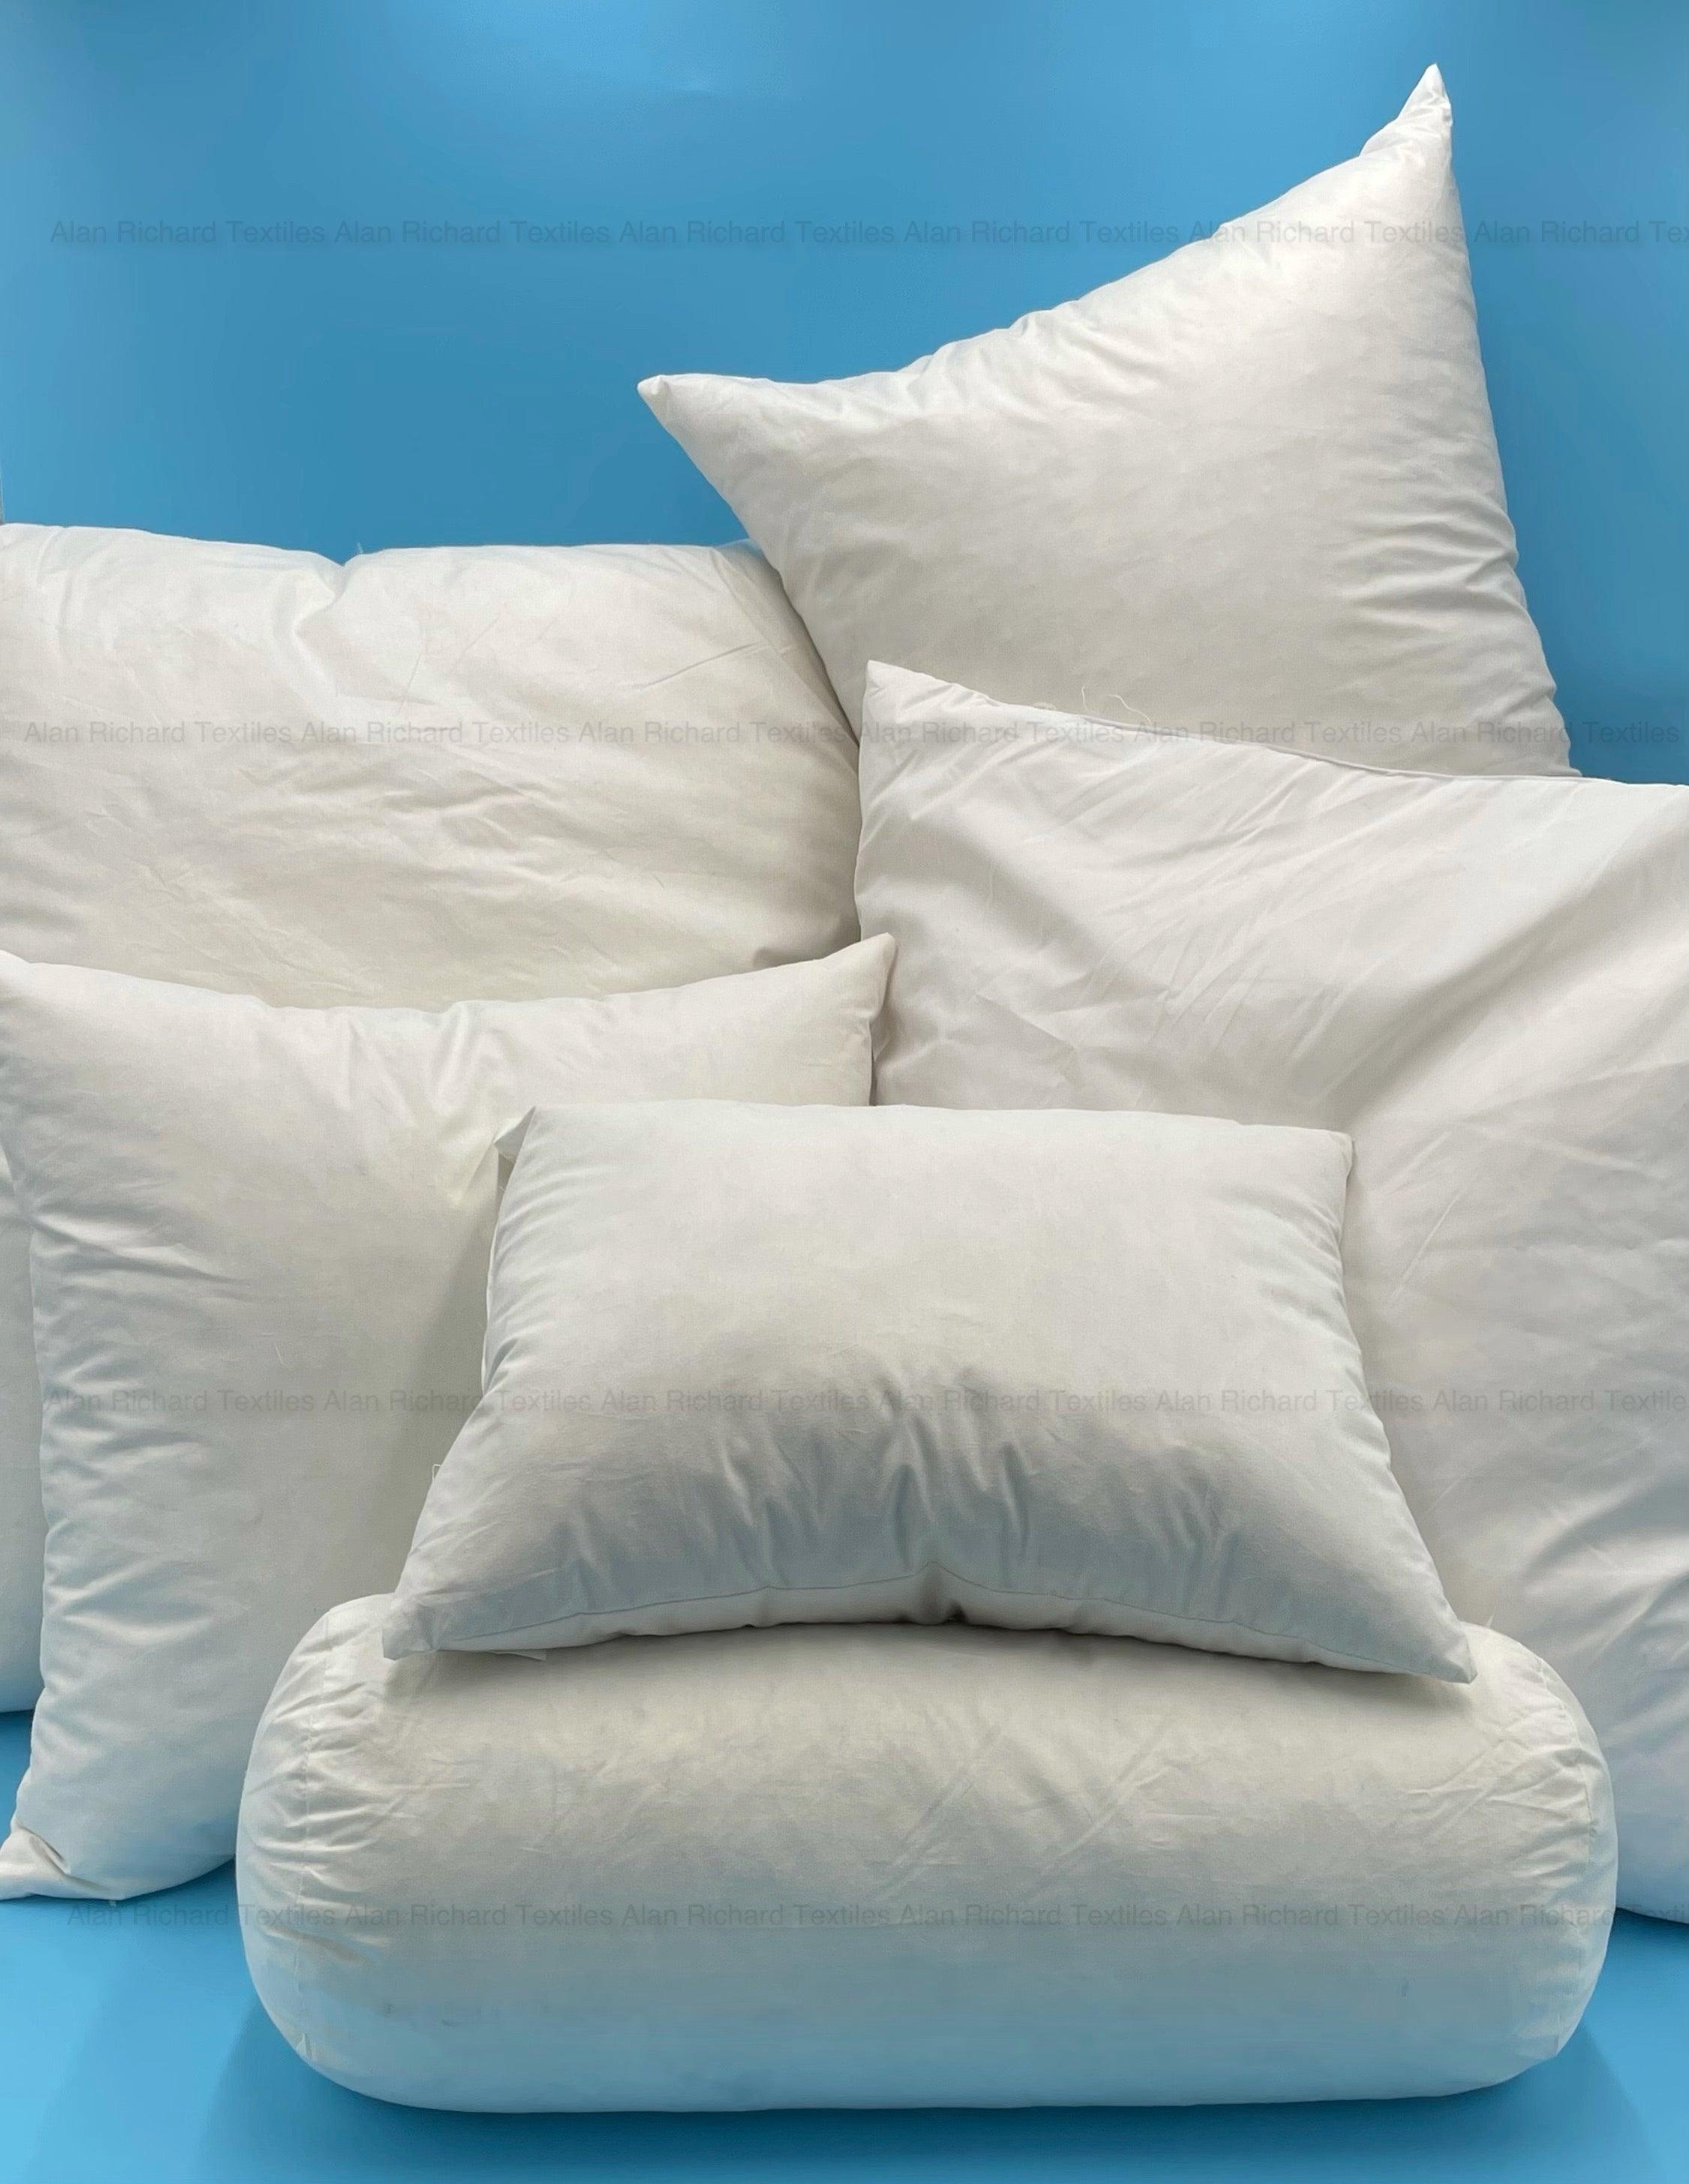 Designer White 25/75 Goose Down Loose Fill. 10lbs - 25% Down 75% Feather Pillows